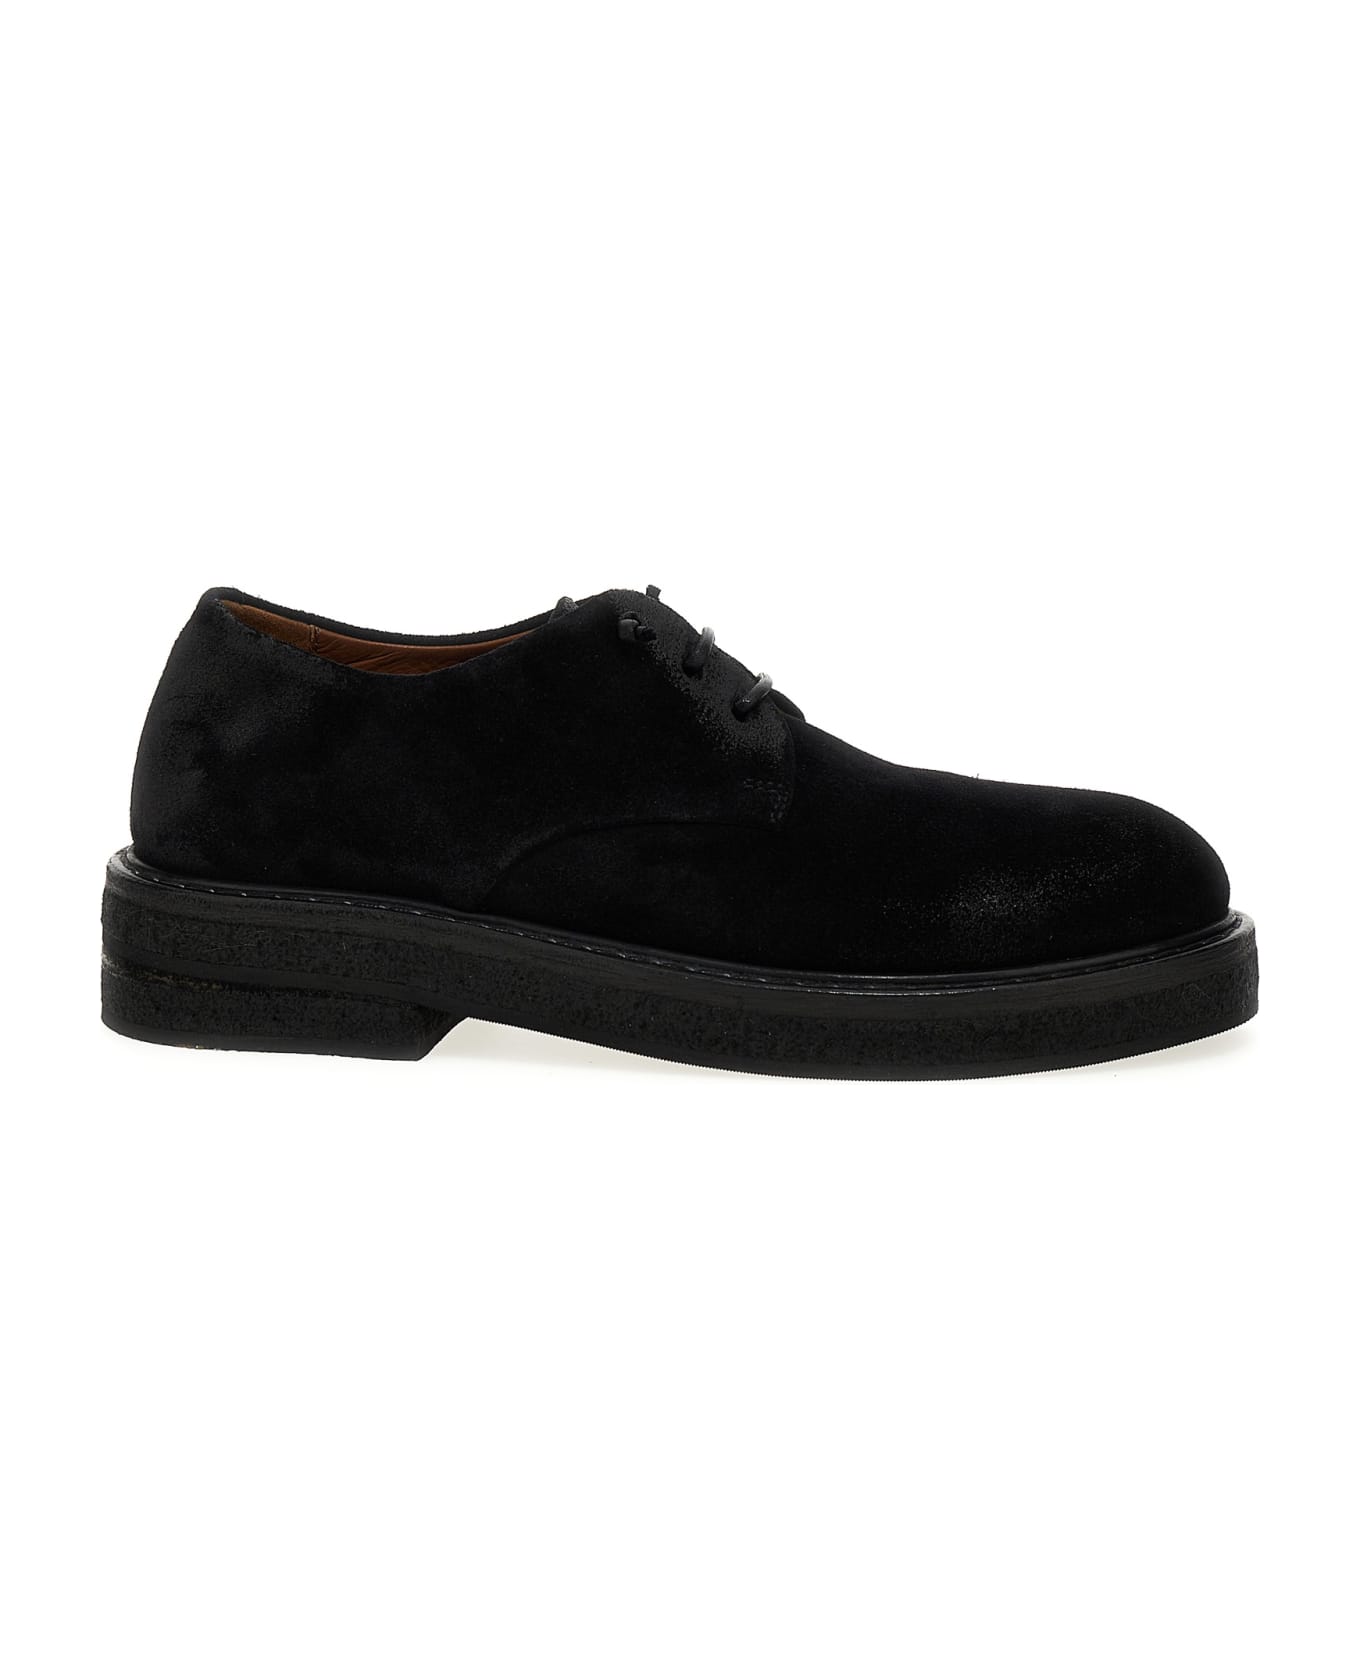 Marsell Parrucca Derby Shoes - Black  